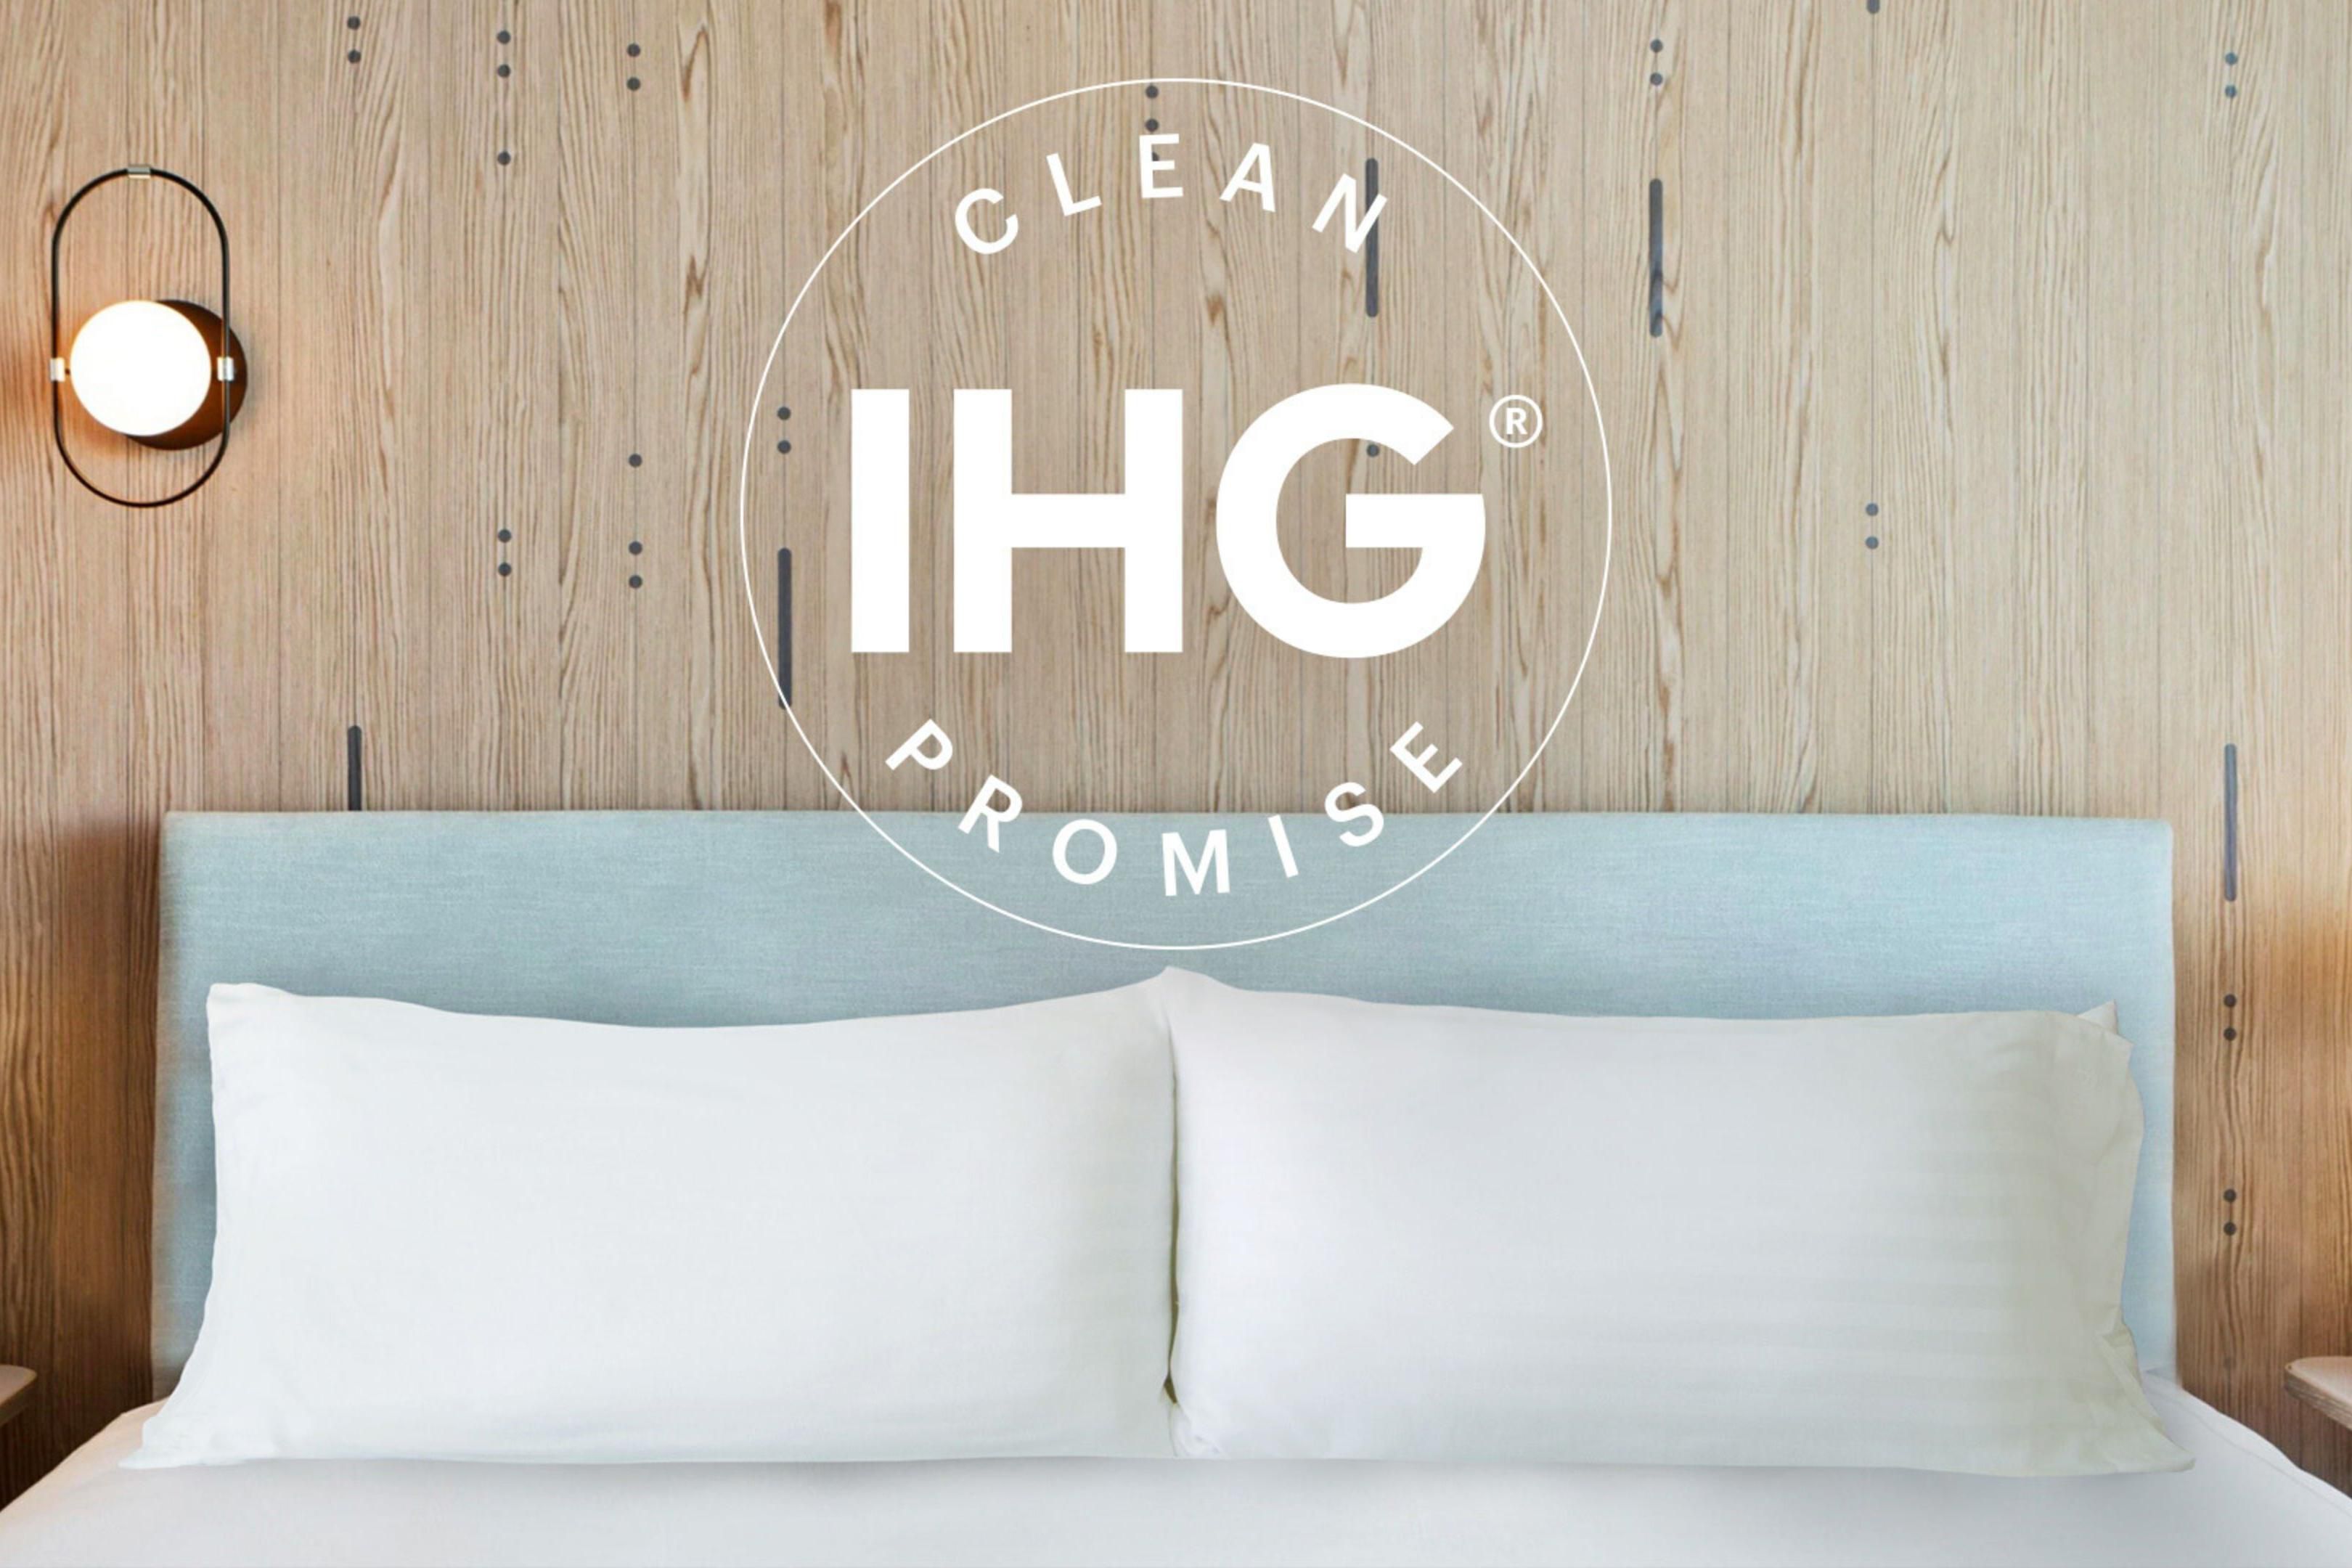 At our hotel, the highest priority remains your safety & comfort, along with the safety of our associates. While cleanliness and safety have always been at a high standard with IHG Way of Clean, the program is now being expanded with additional COVID-19 protocols and best practices.
